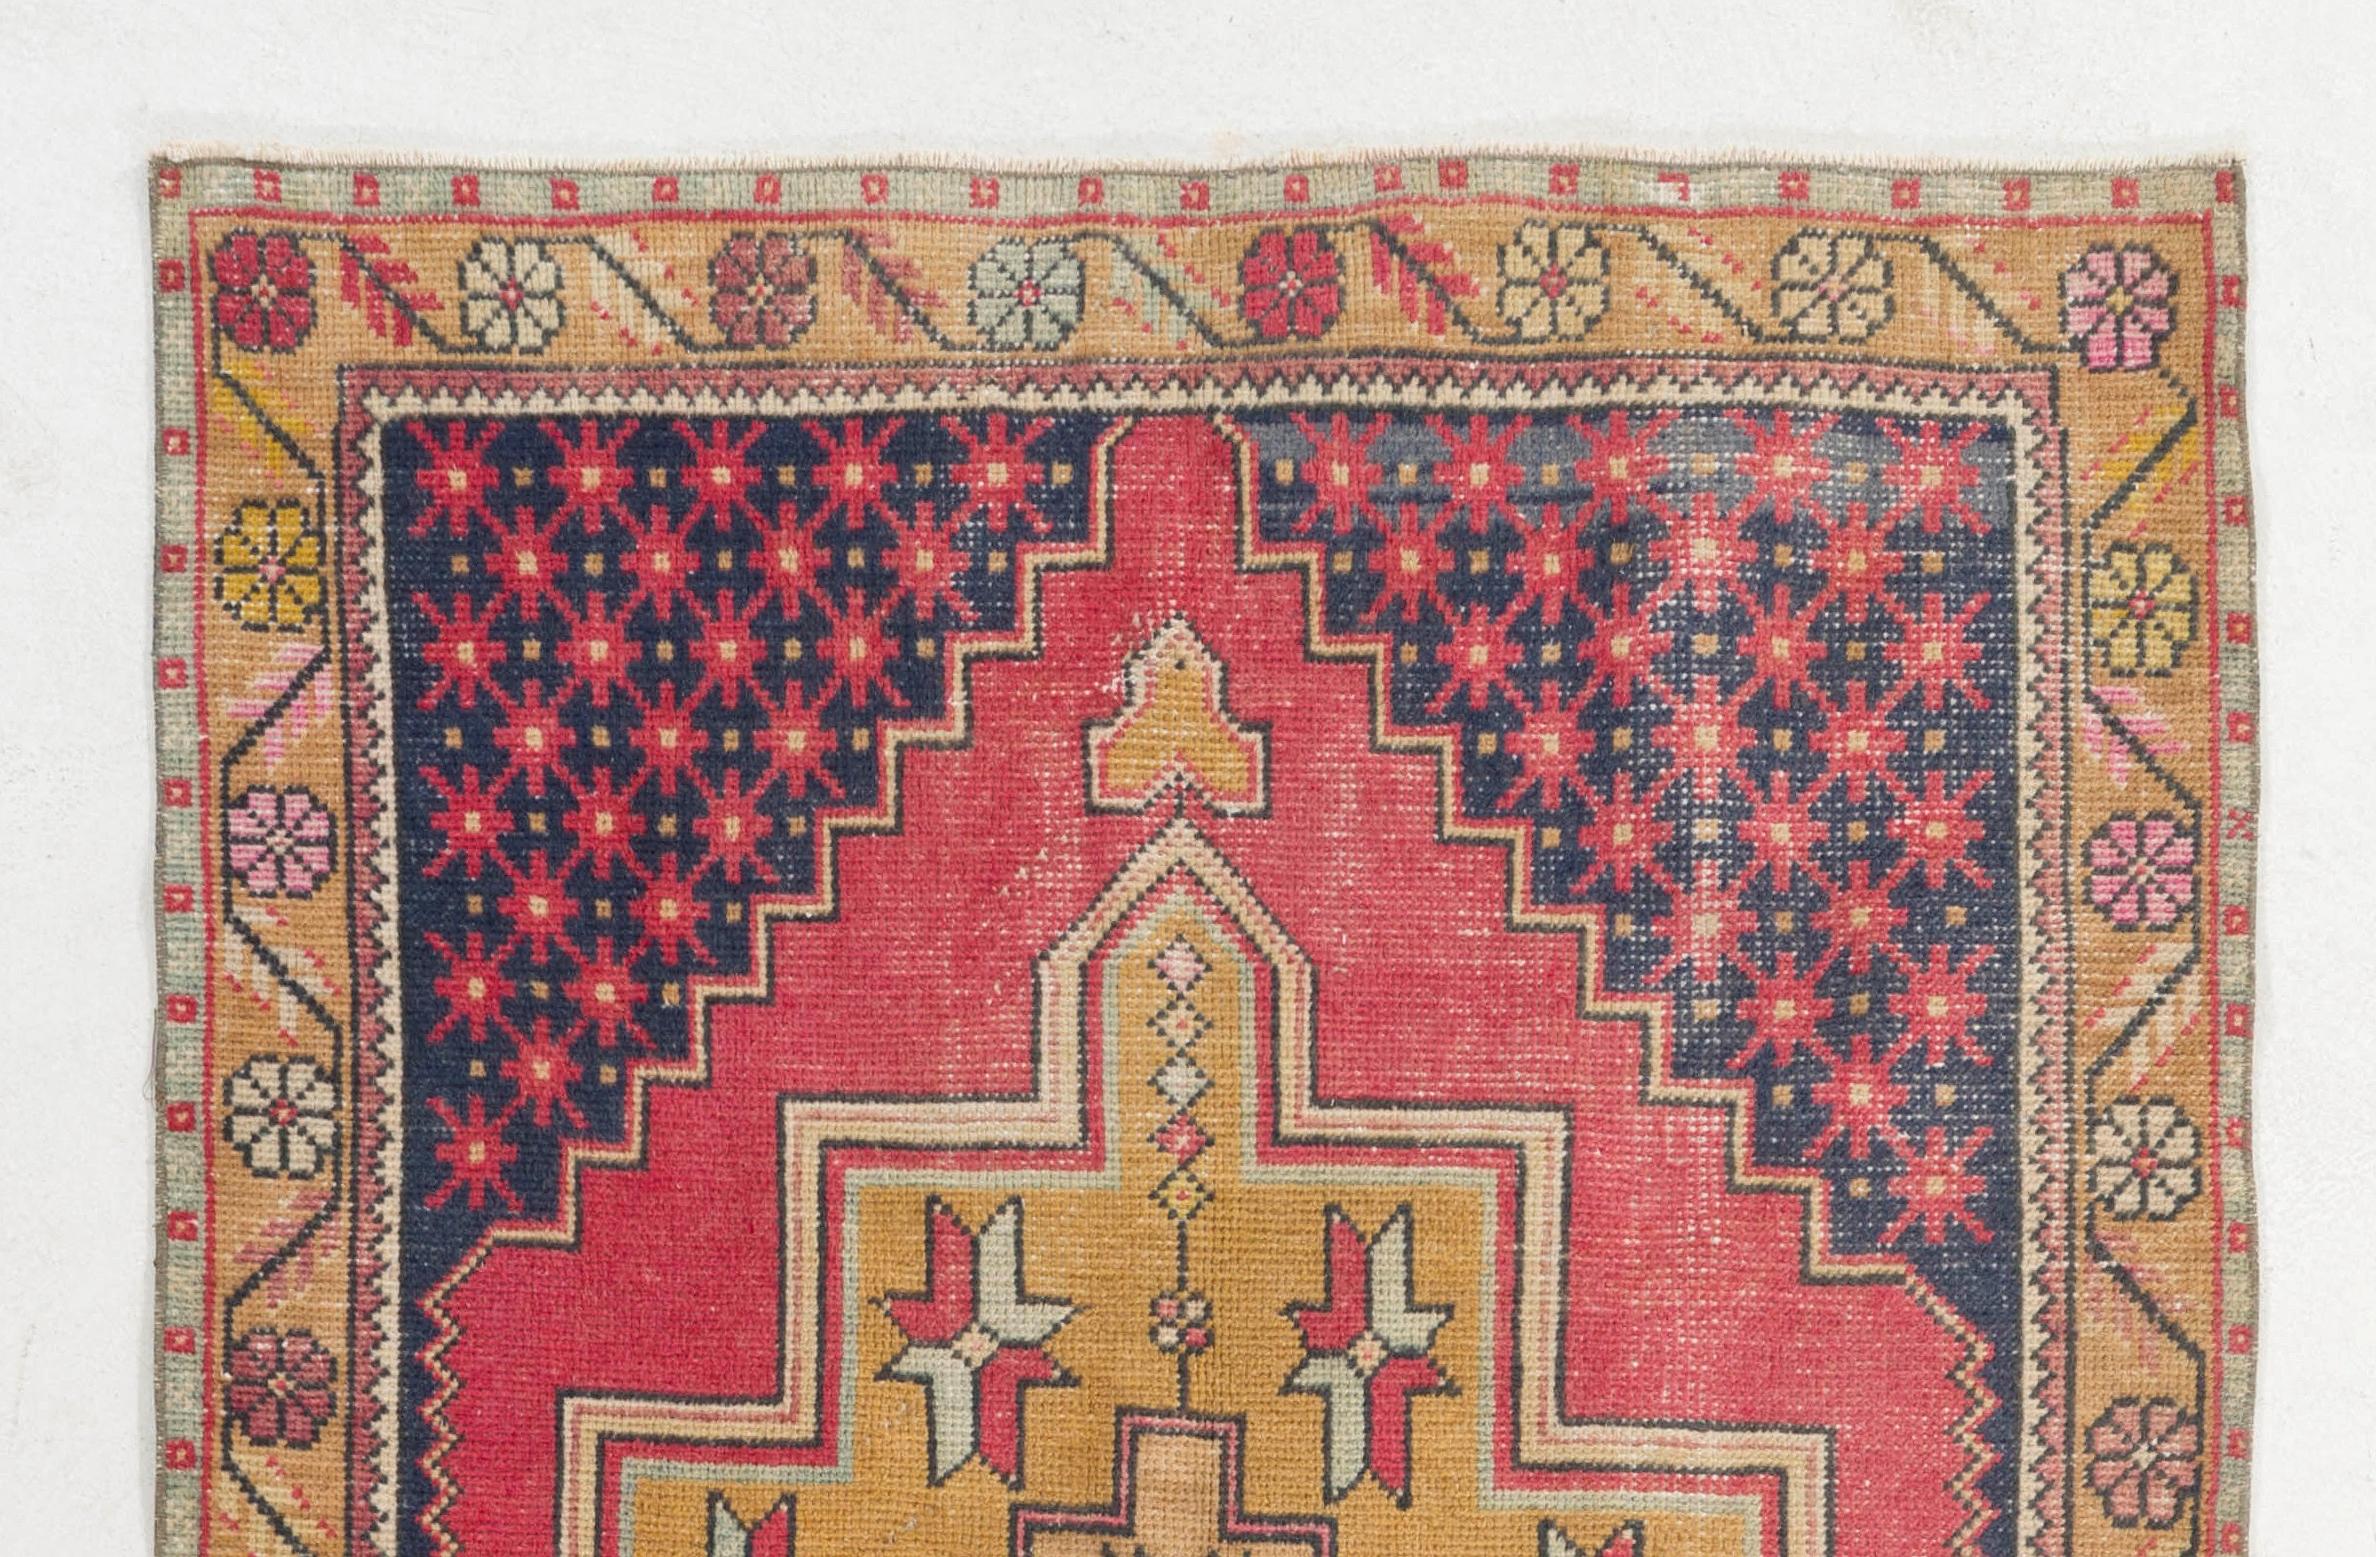 This vintage Central Anatolian area rug has two linked geometric medallions in deep-saturated gold that are decorated with abstract stars against a plain field in vivid raspberry red. The corner-pieces in dark indigo feature a dense pattern of red